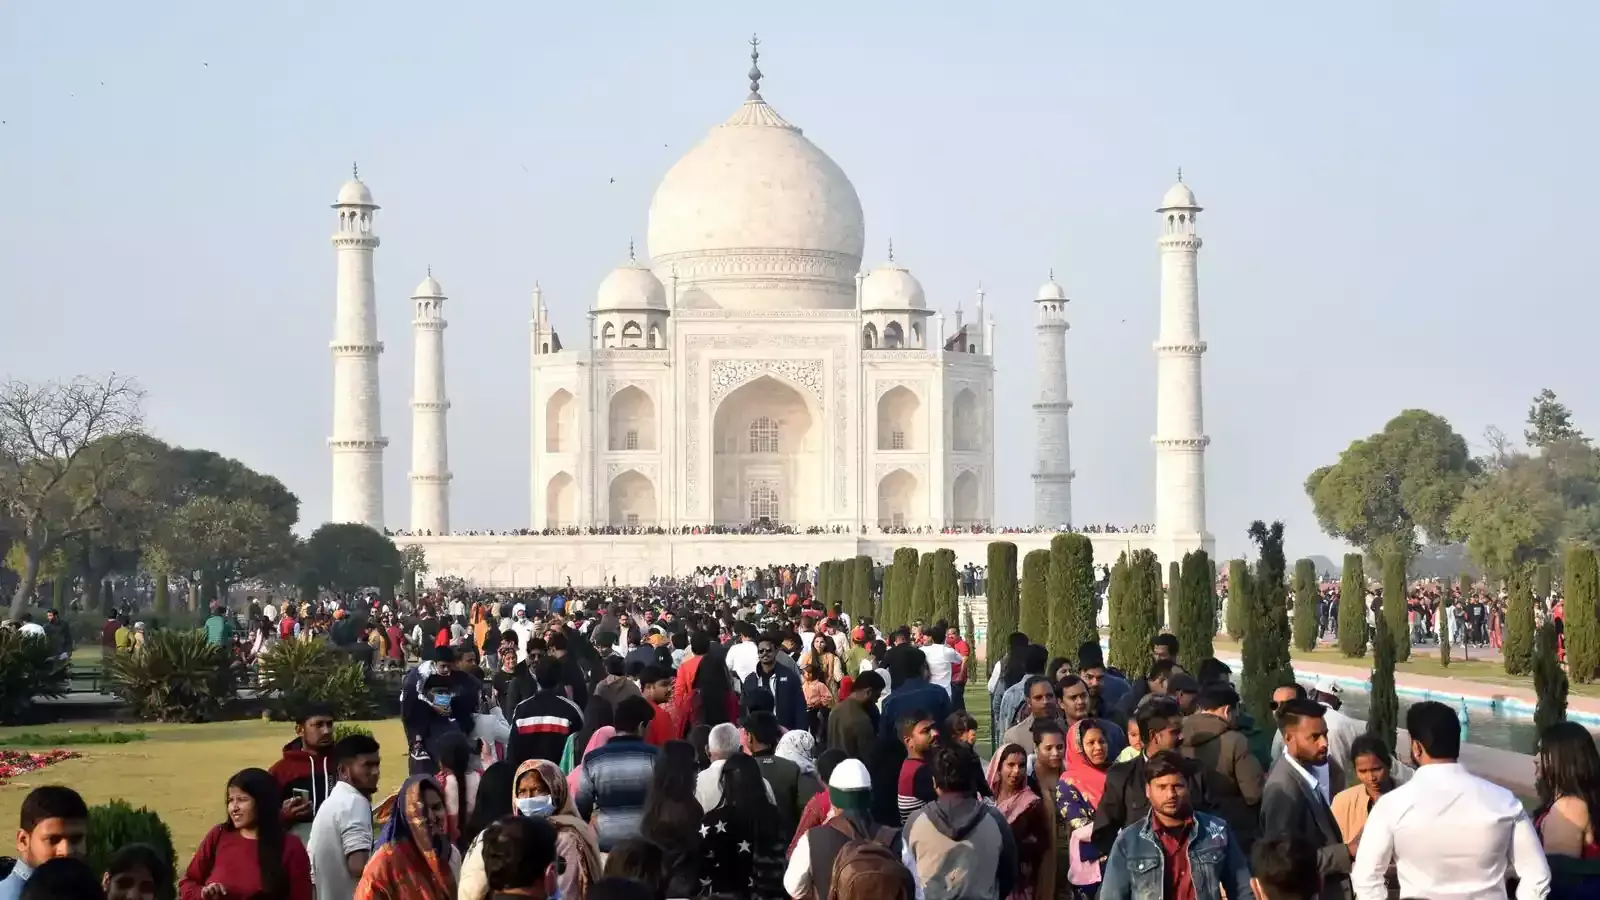 Agra gears up for arrival of G20 delegates